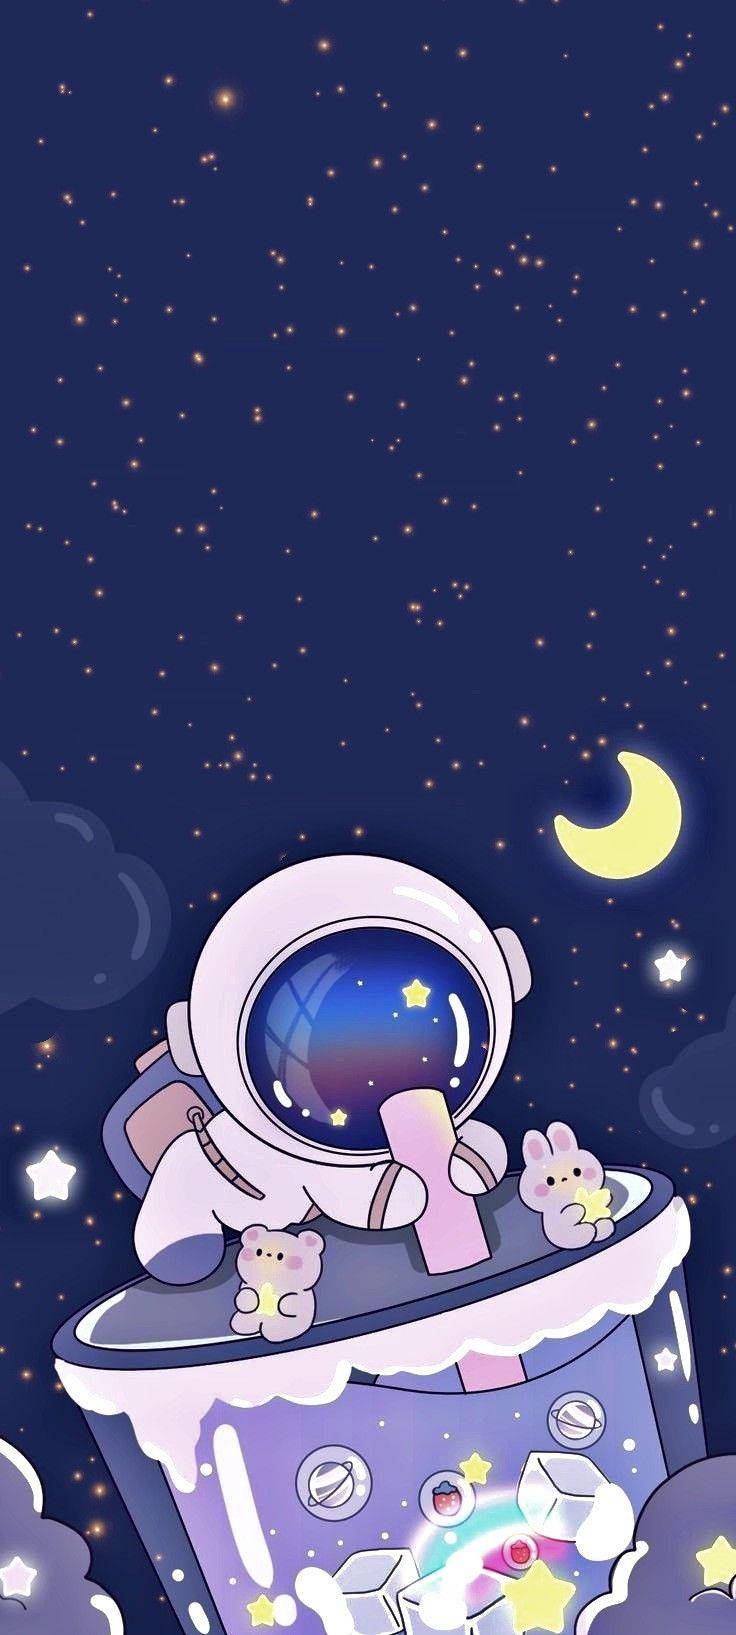 Cartoon Astronaut Sipping From Large Cup